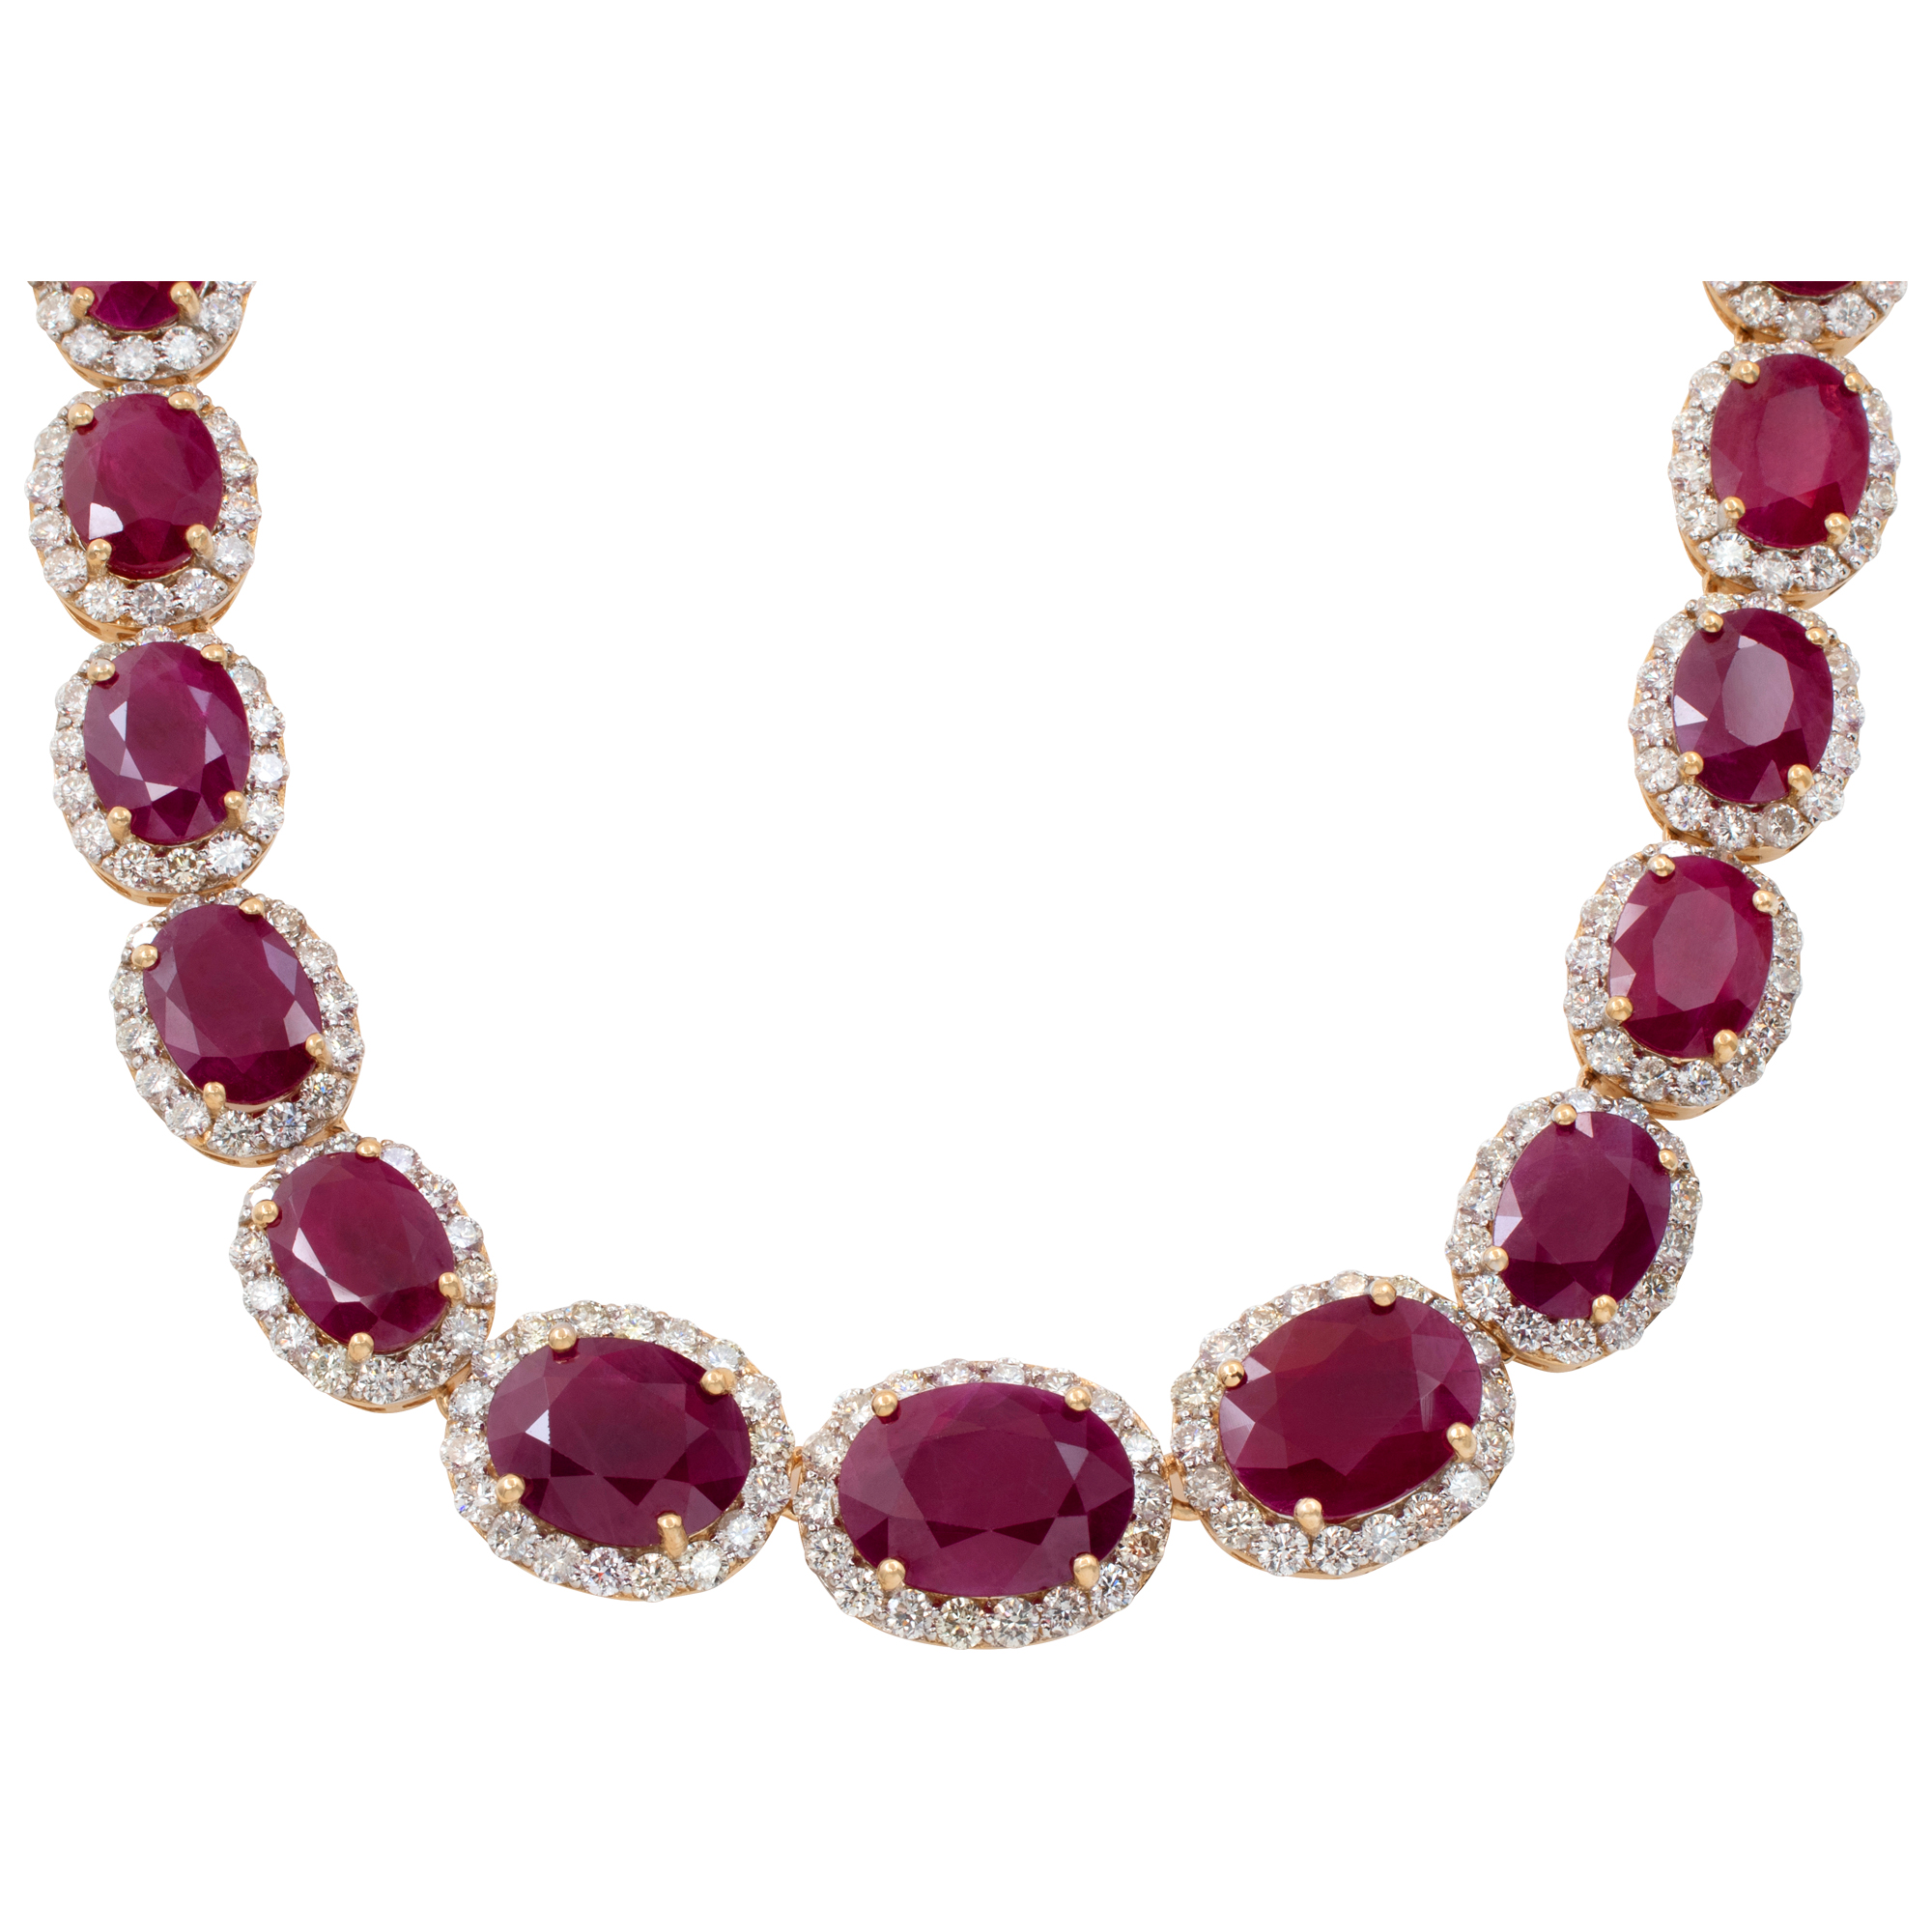 GIA Ruby and diamond necklace in 18k